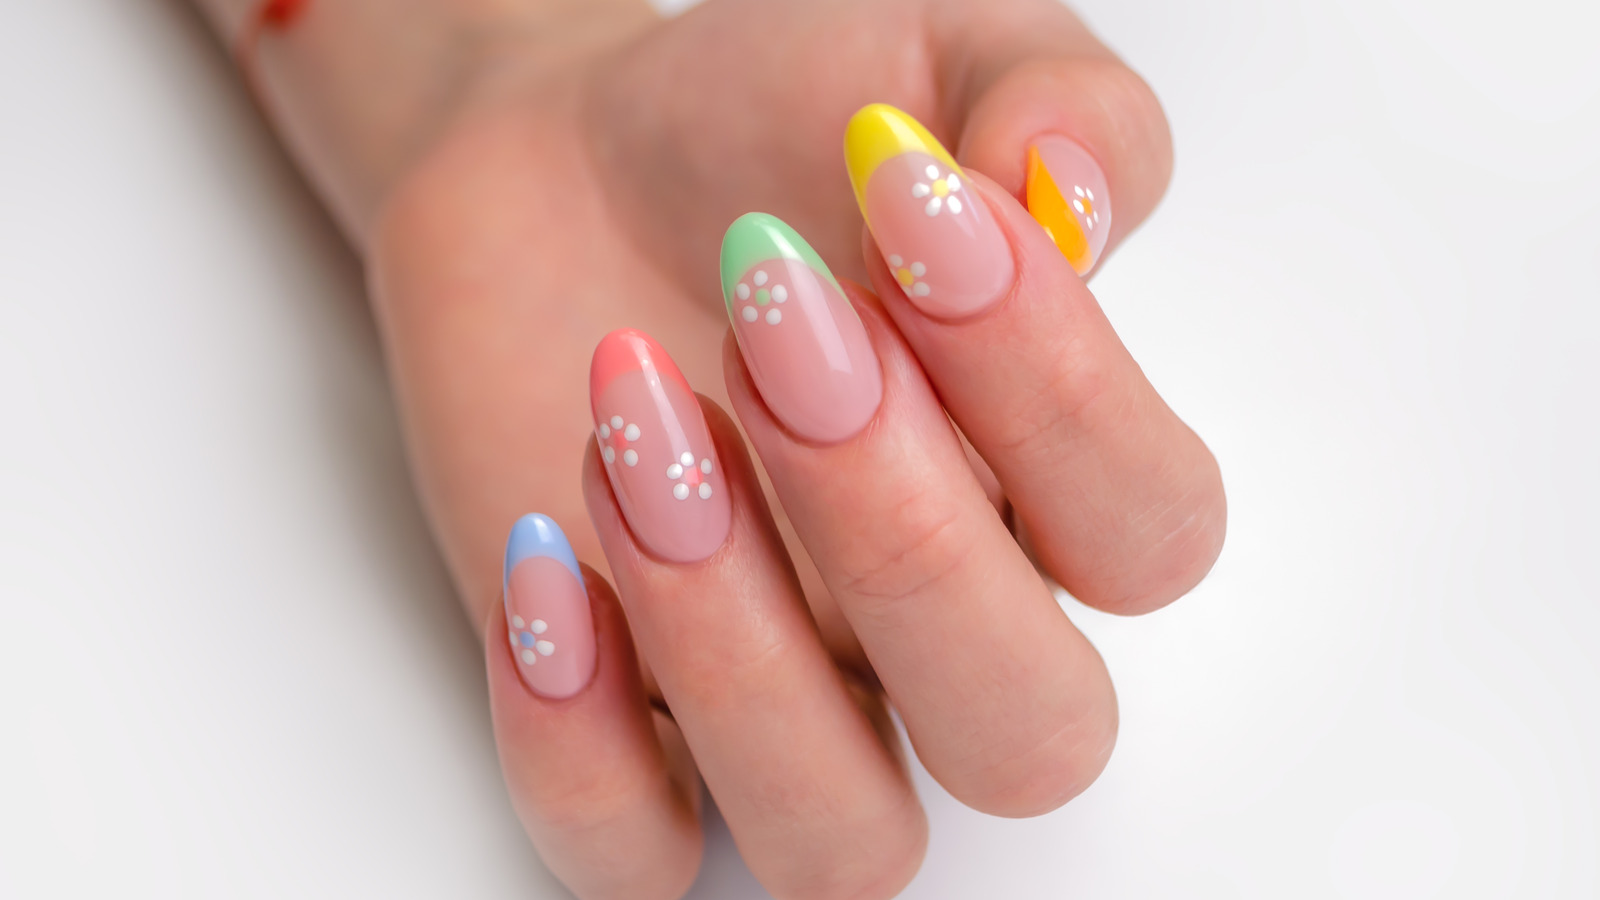 9. How to Incorporate Daisy Chain Nail Art into Your Manicure - wide 2